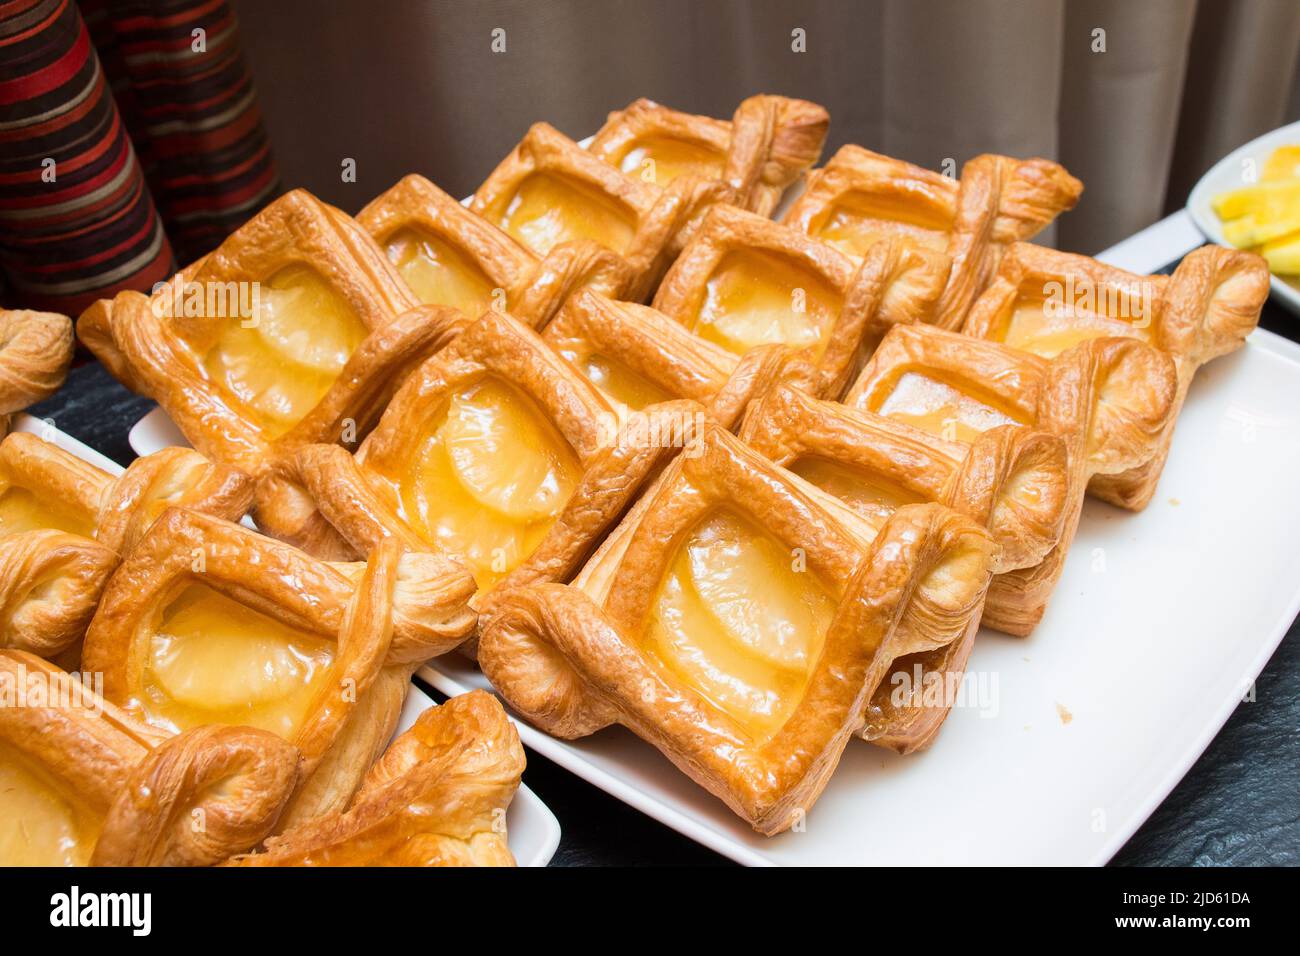 Puff pastry with peach jelly. Layout on the buffet table. Crispy dough. Fresh baked goods. Stock Photo